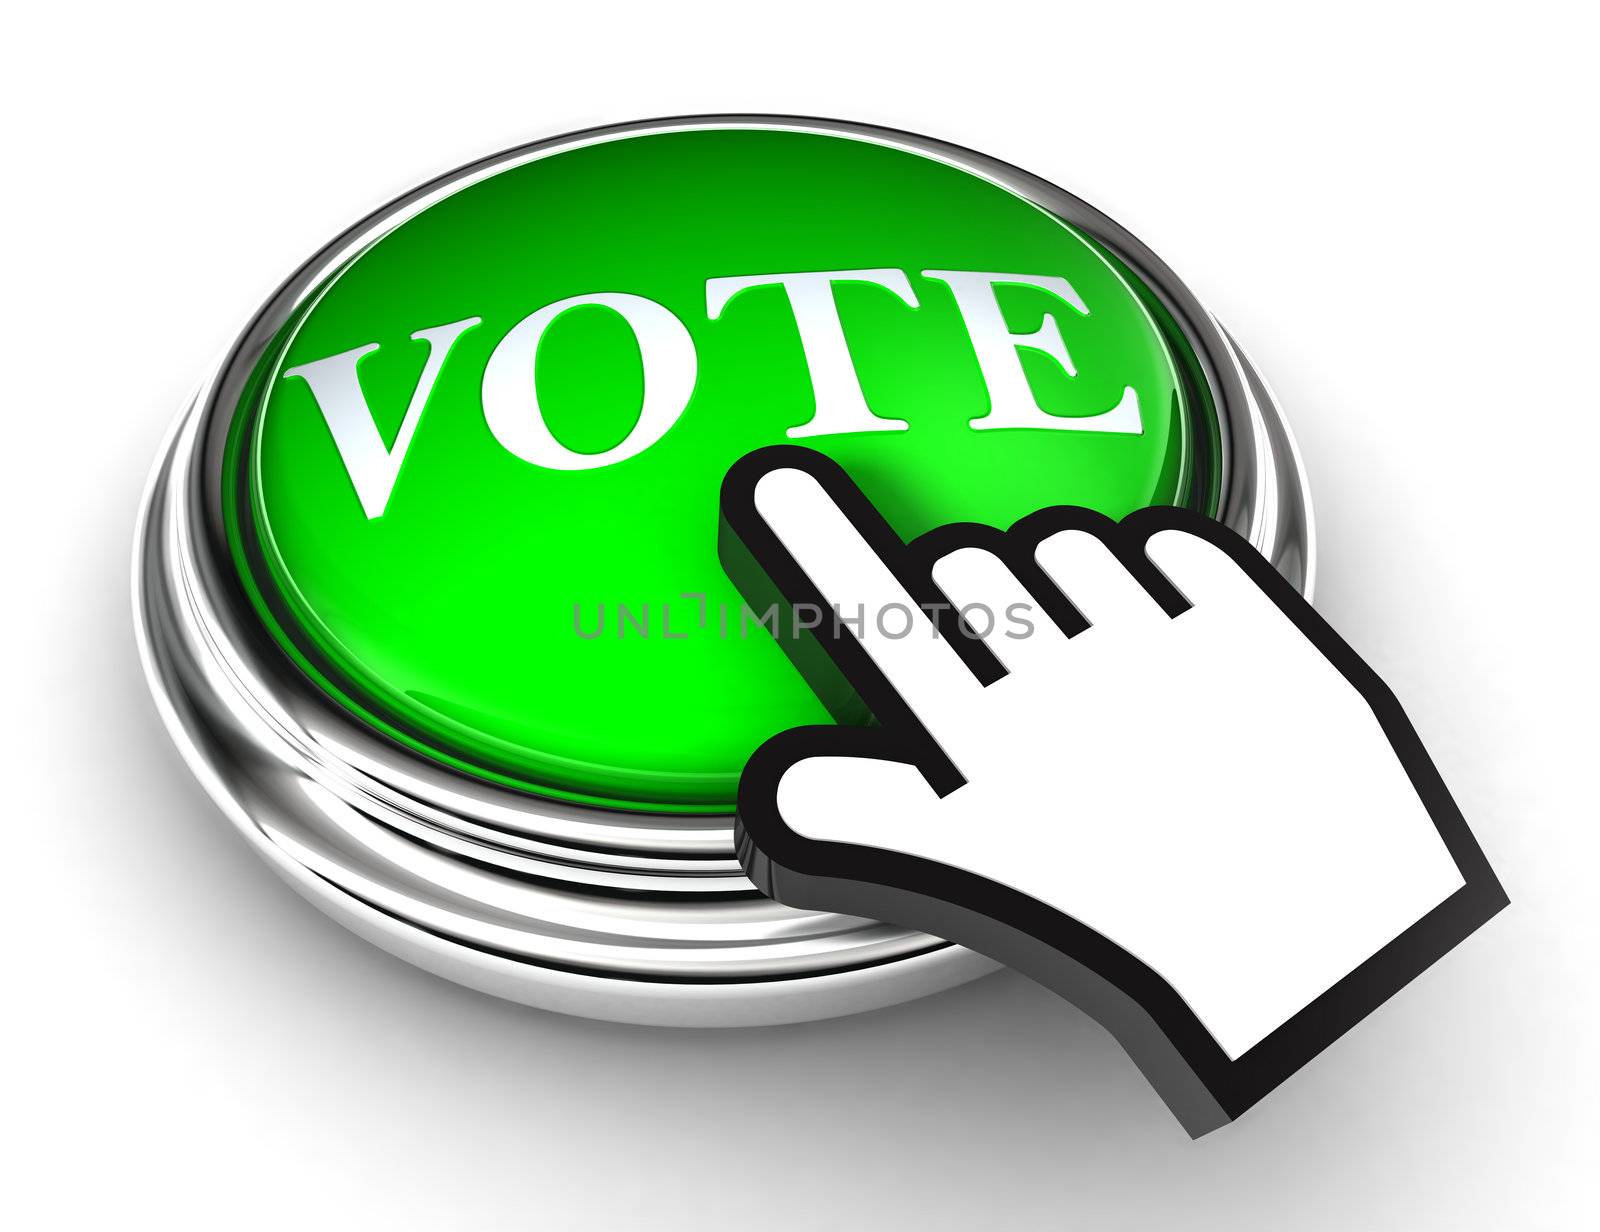 vote green button and cursor hand on white background. clipping paths included